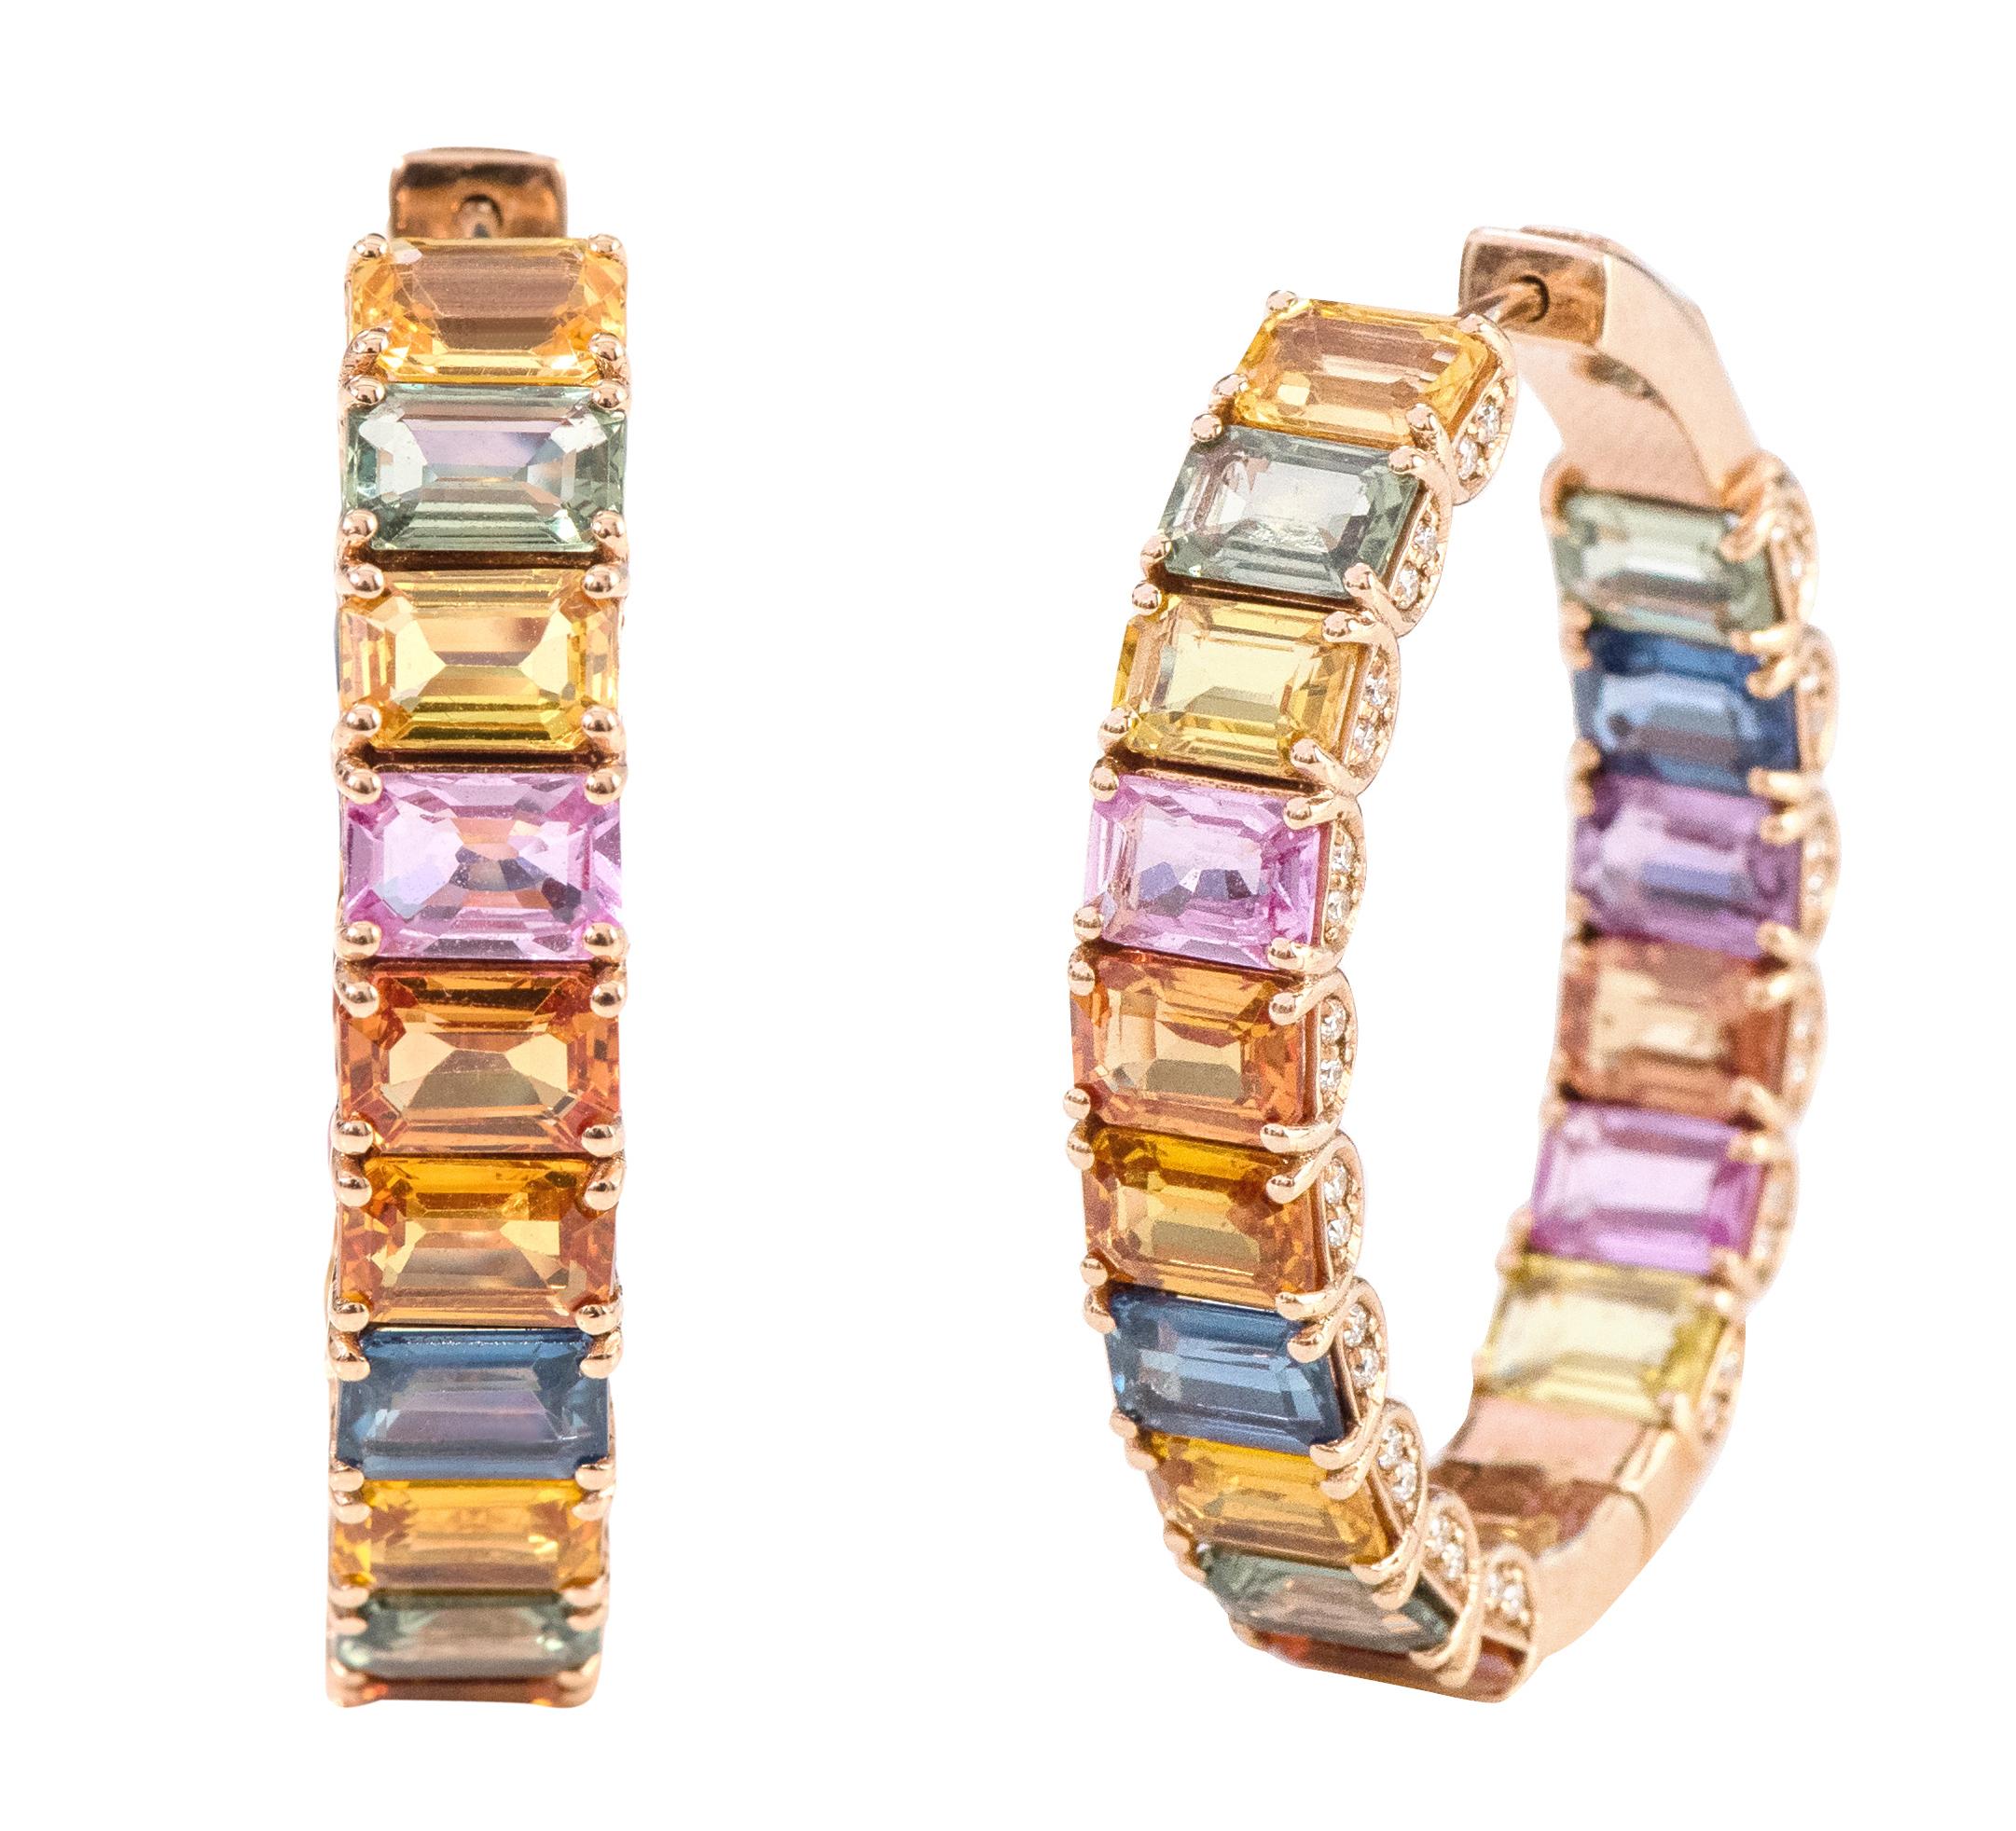 18 Karat Rose Gold 21.26 Carat Multi-Color Sapphire and Diamond Hoop Earrings

This marvelous rainbow multi-sapphire and side diamond full hoop is alluring. The solitaire horizontally placed emerald cut multi-sapphires in grain prong rose gold